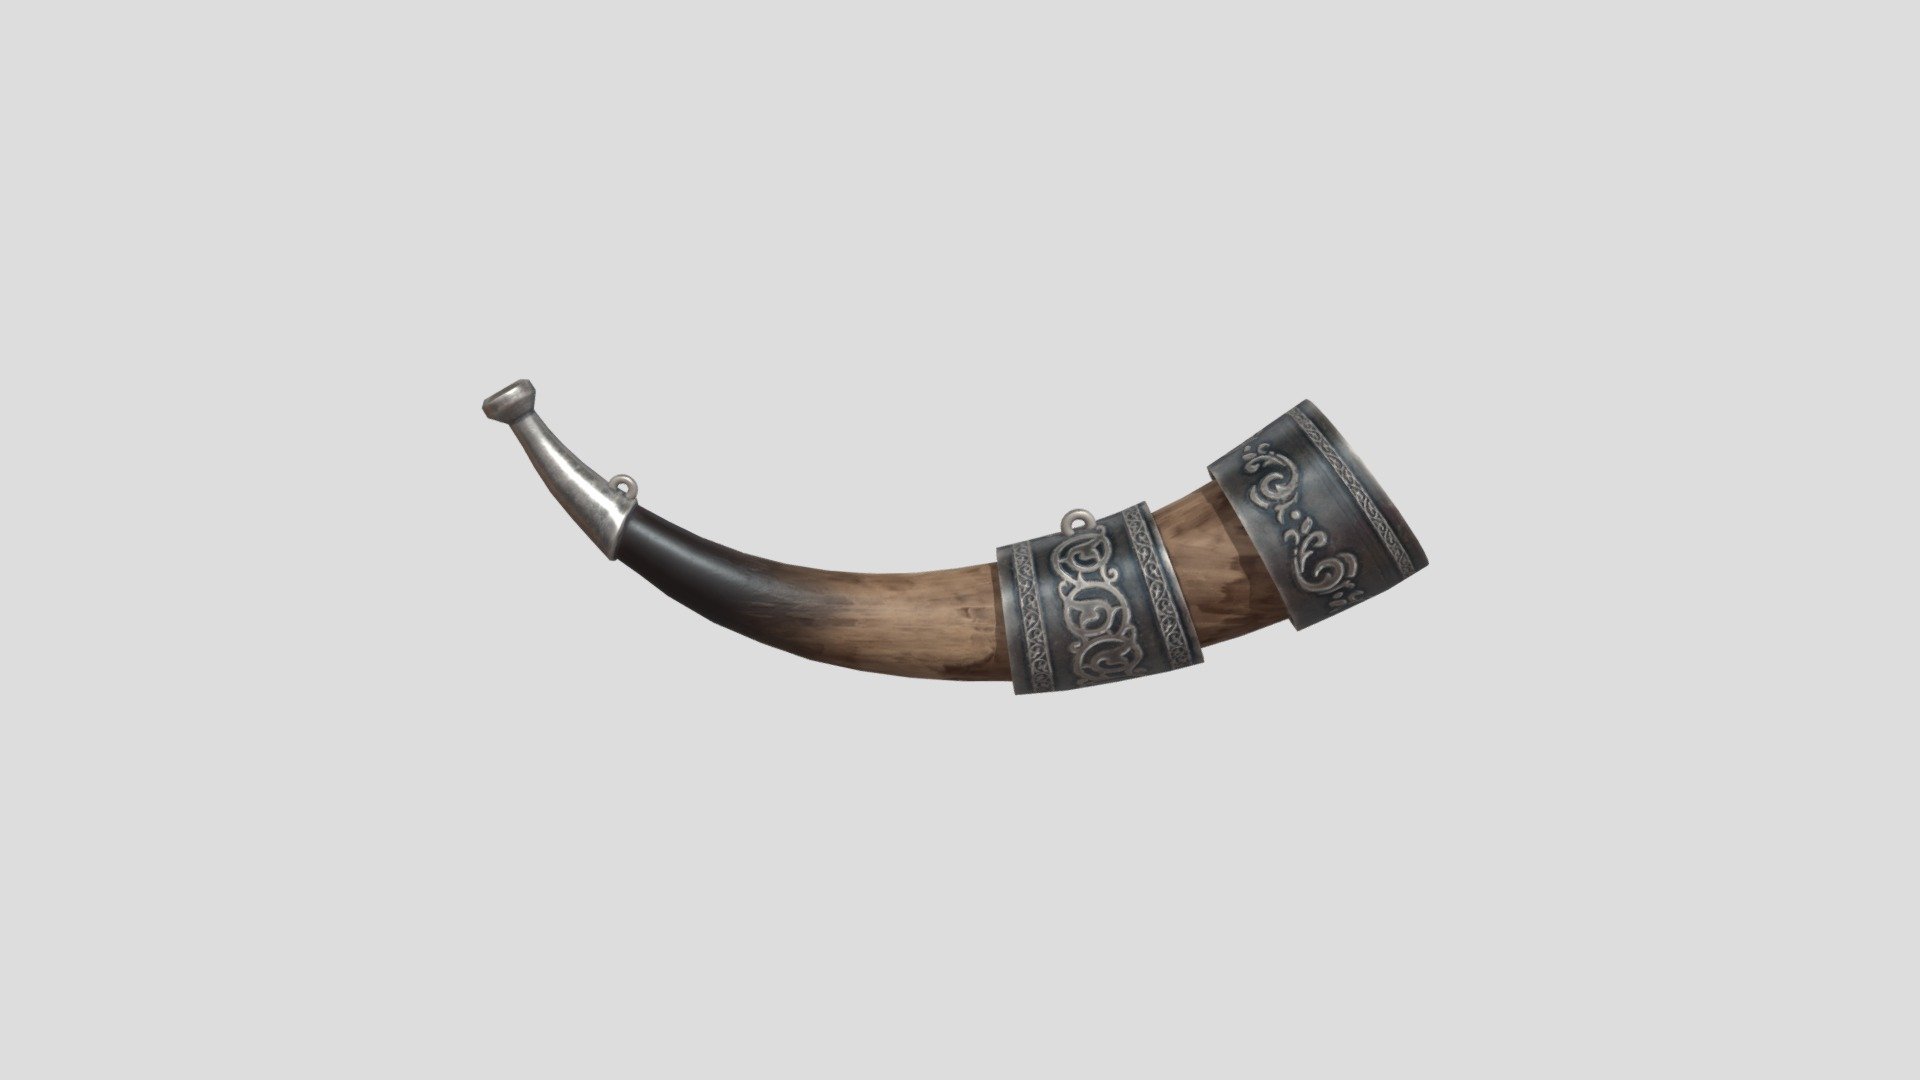 Low-poly 3D model PBR Game Ready Textures created in Substance Painter and exported out as .PNG PBR Materials with 2k textures including: , Normals, Metalness, Roughness and Base Color modelled in Blender 3.0 Fully UV unwrapped Tested in cycles and EEVEE Formats included .Blend .FBX .OBJ - Stylized Viking Arabian style Horn Game Ready - 3D model by nomank 3d model